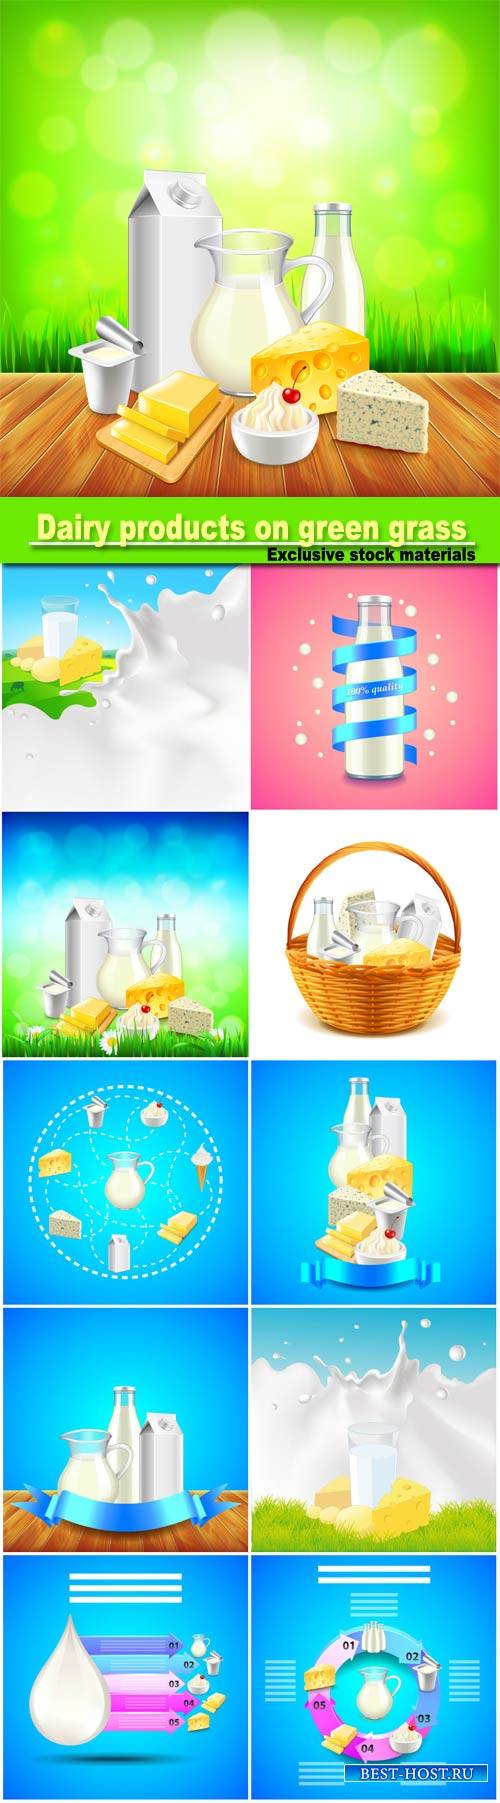 Dairy products on green grass, blue sky background vector